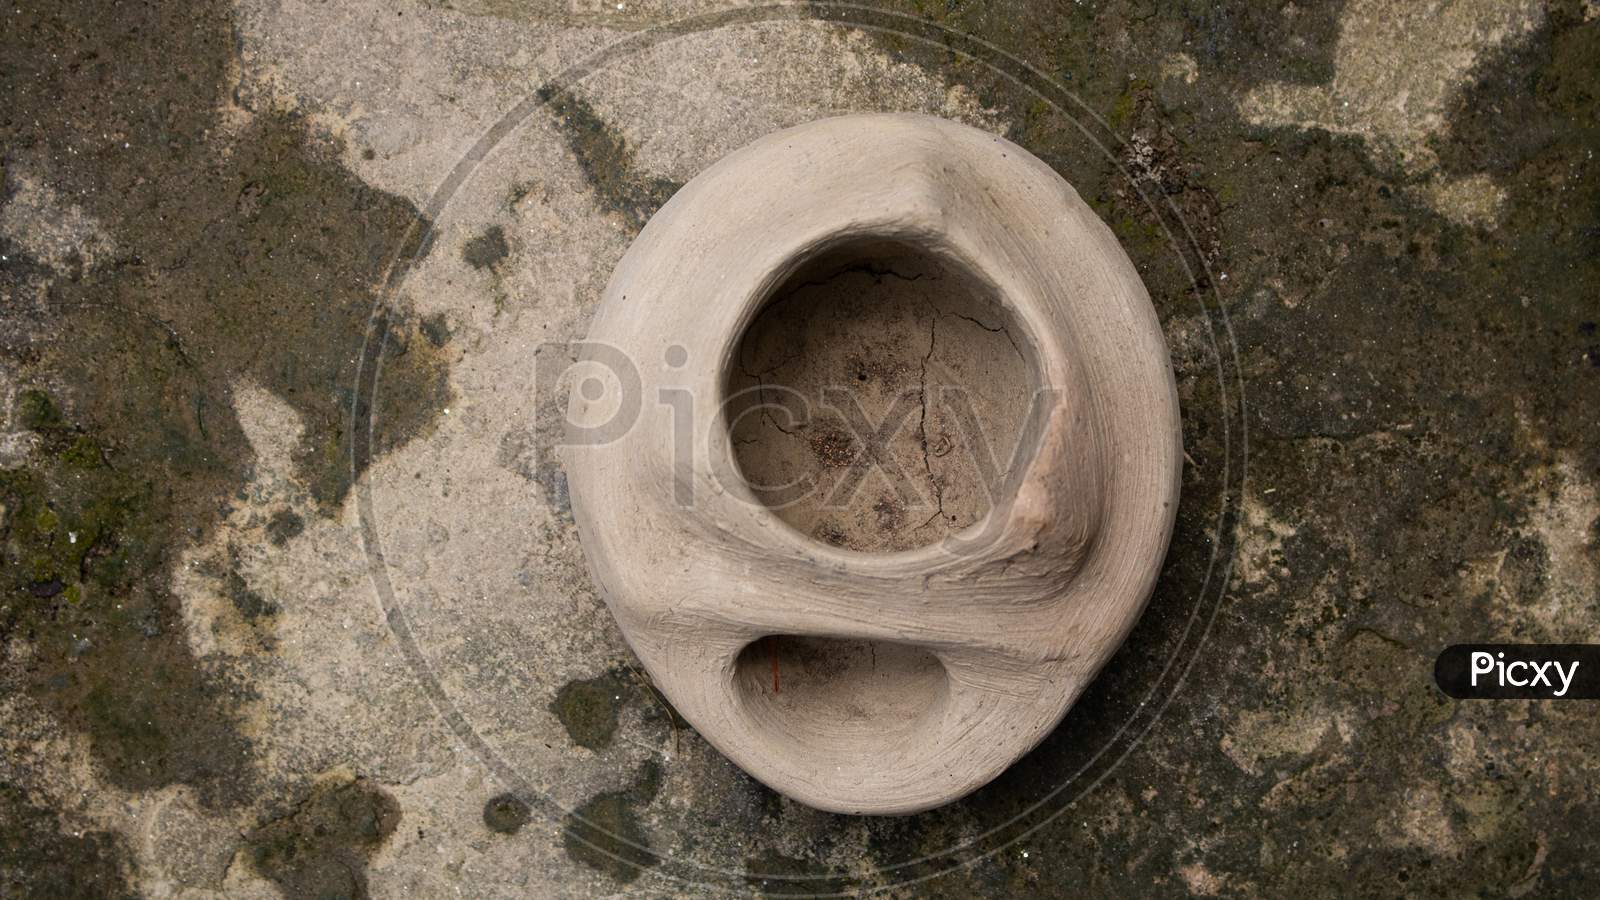 This Is A Handmade Bangladeshi Clay Stove. It Is Used For Cooking In Rural Bengal.